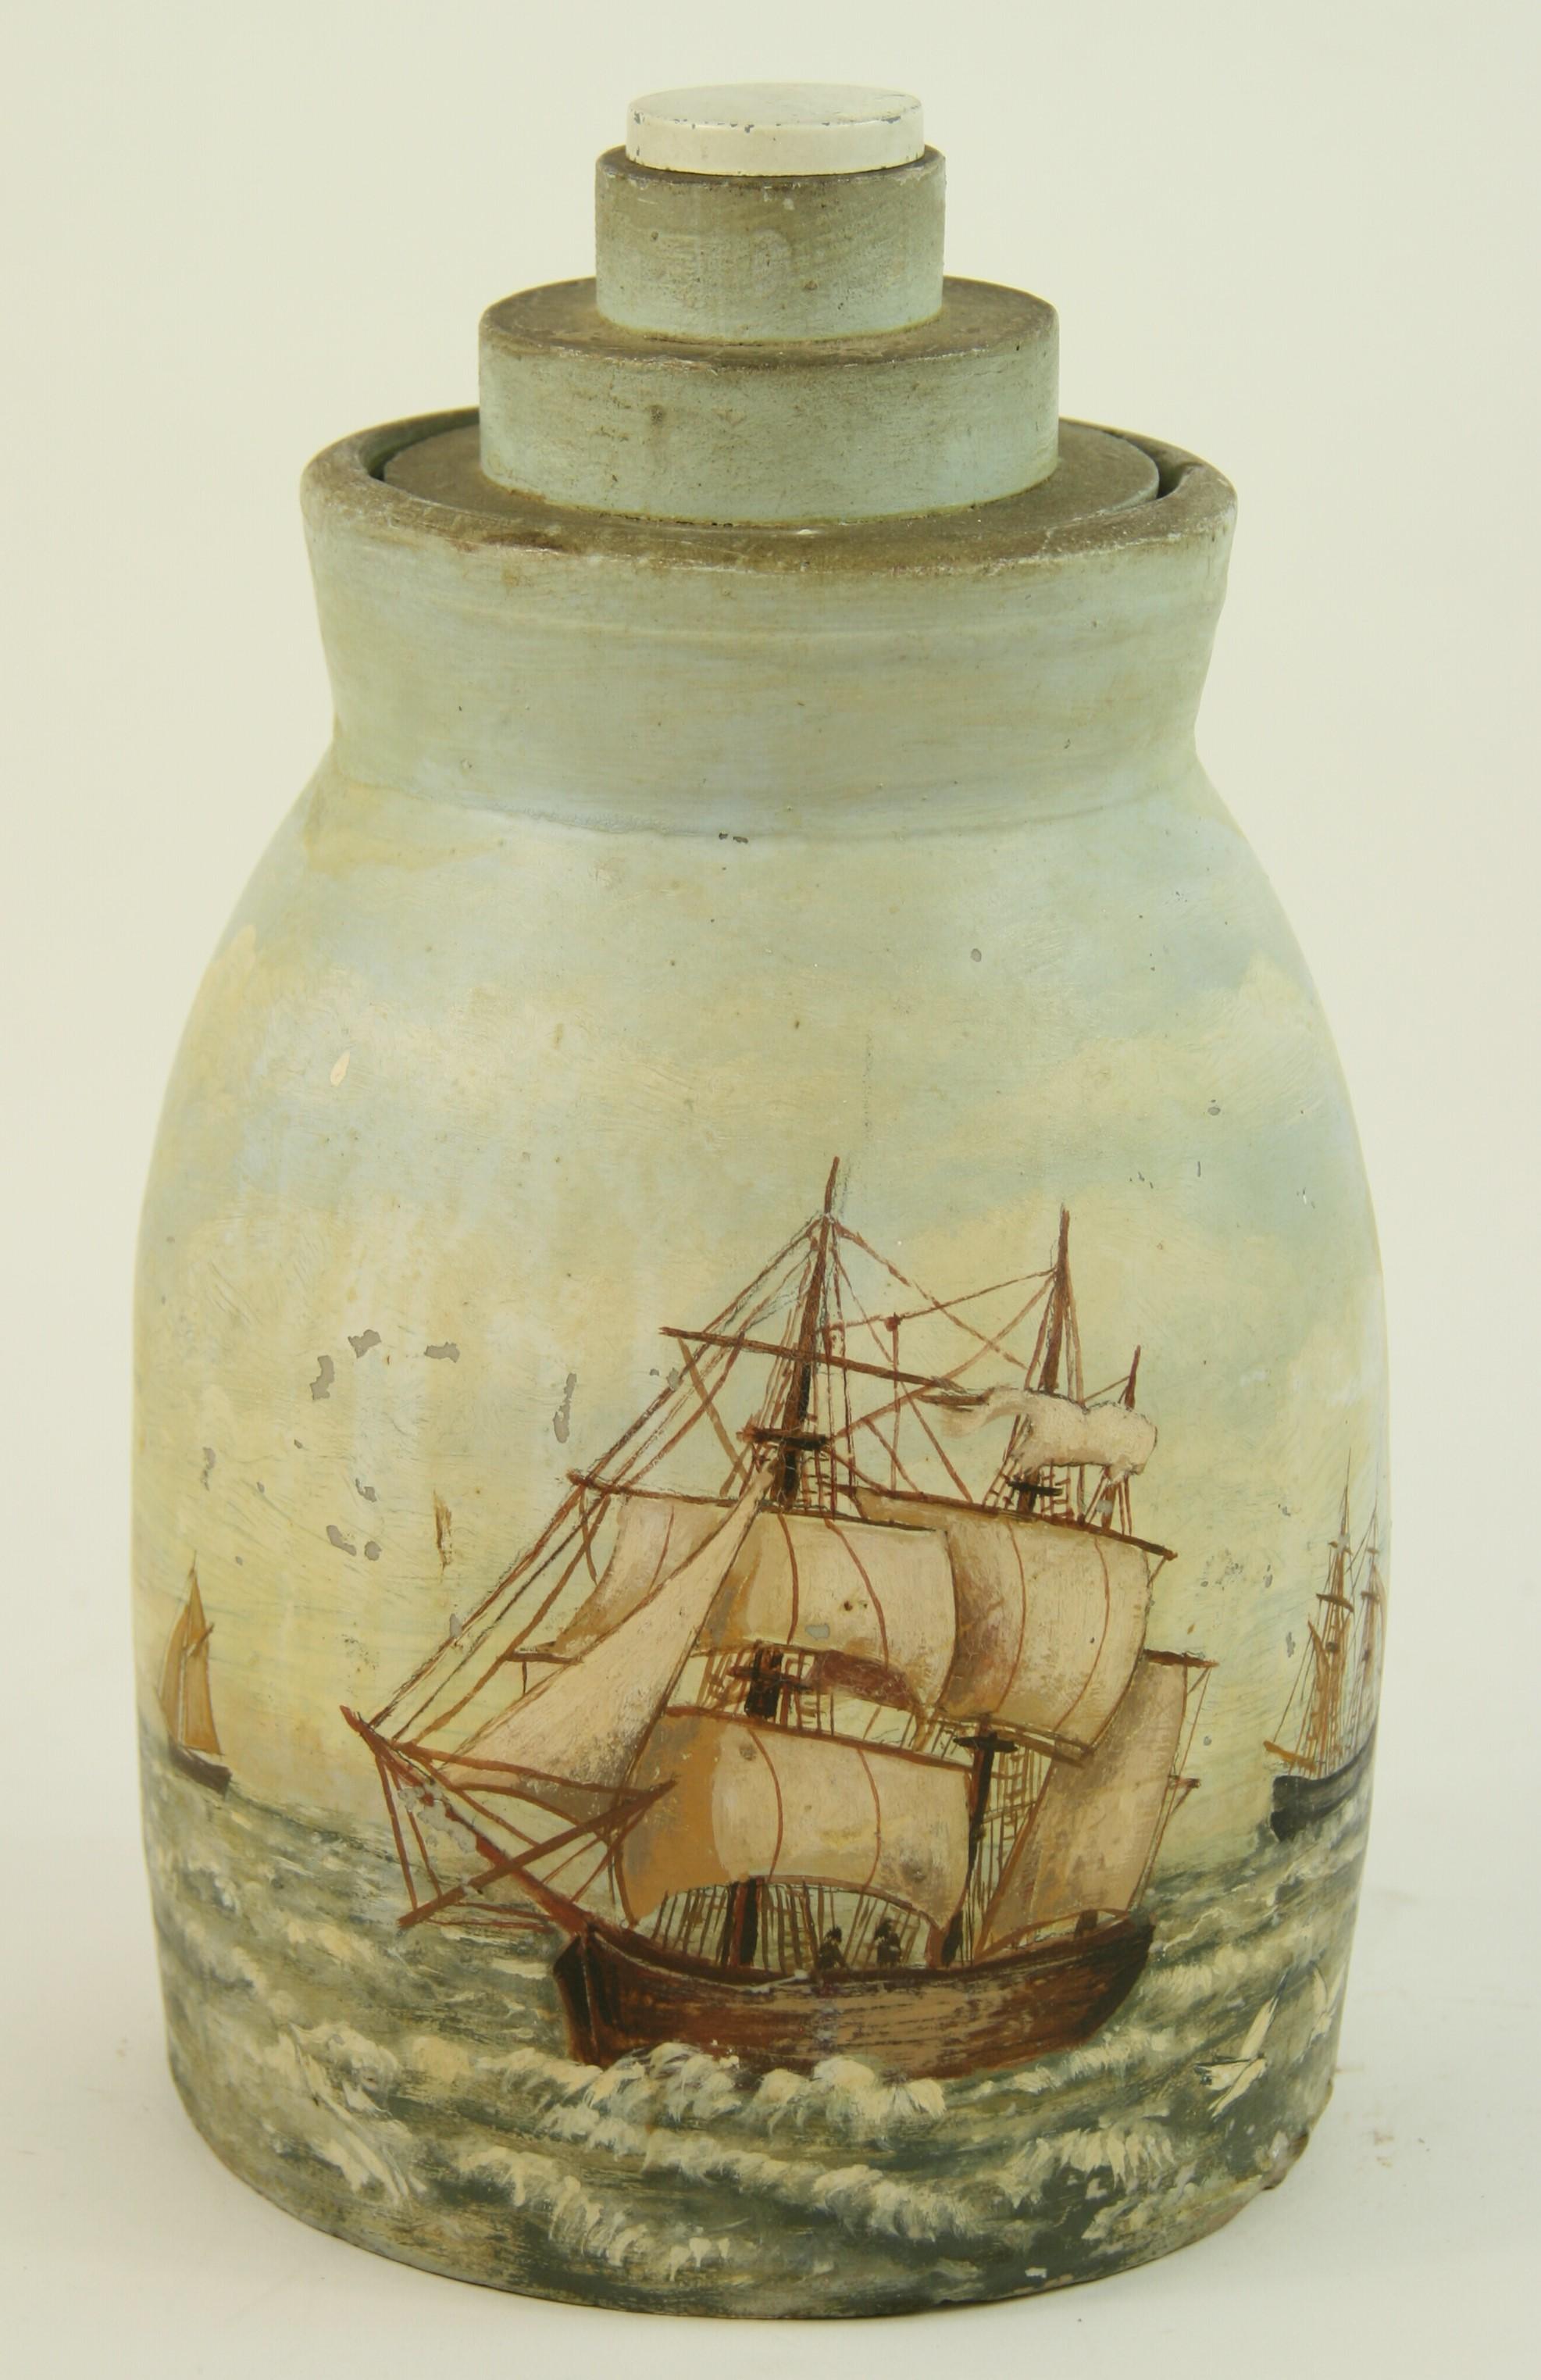 3-441 Folk Art maritime ships paintings on a crock pot with wood lid.
At one point converted to a lamp then undone.